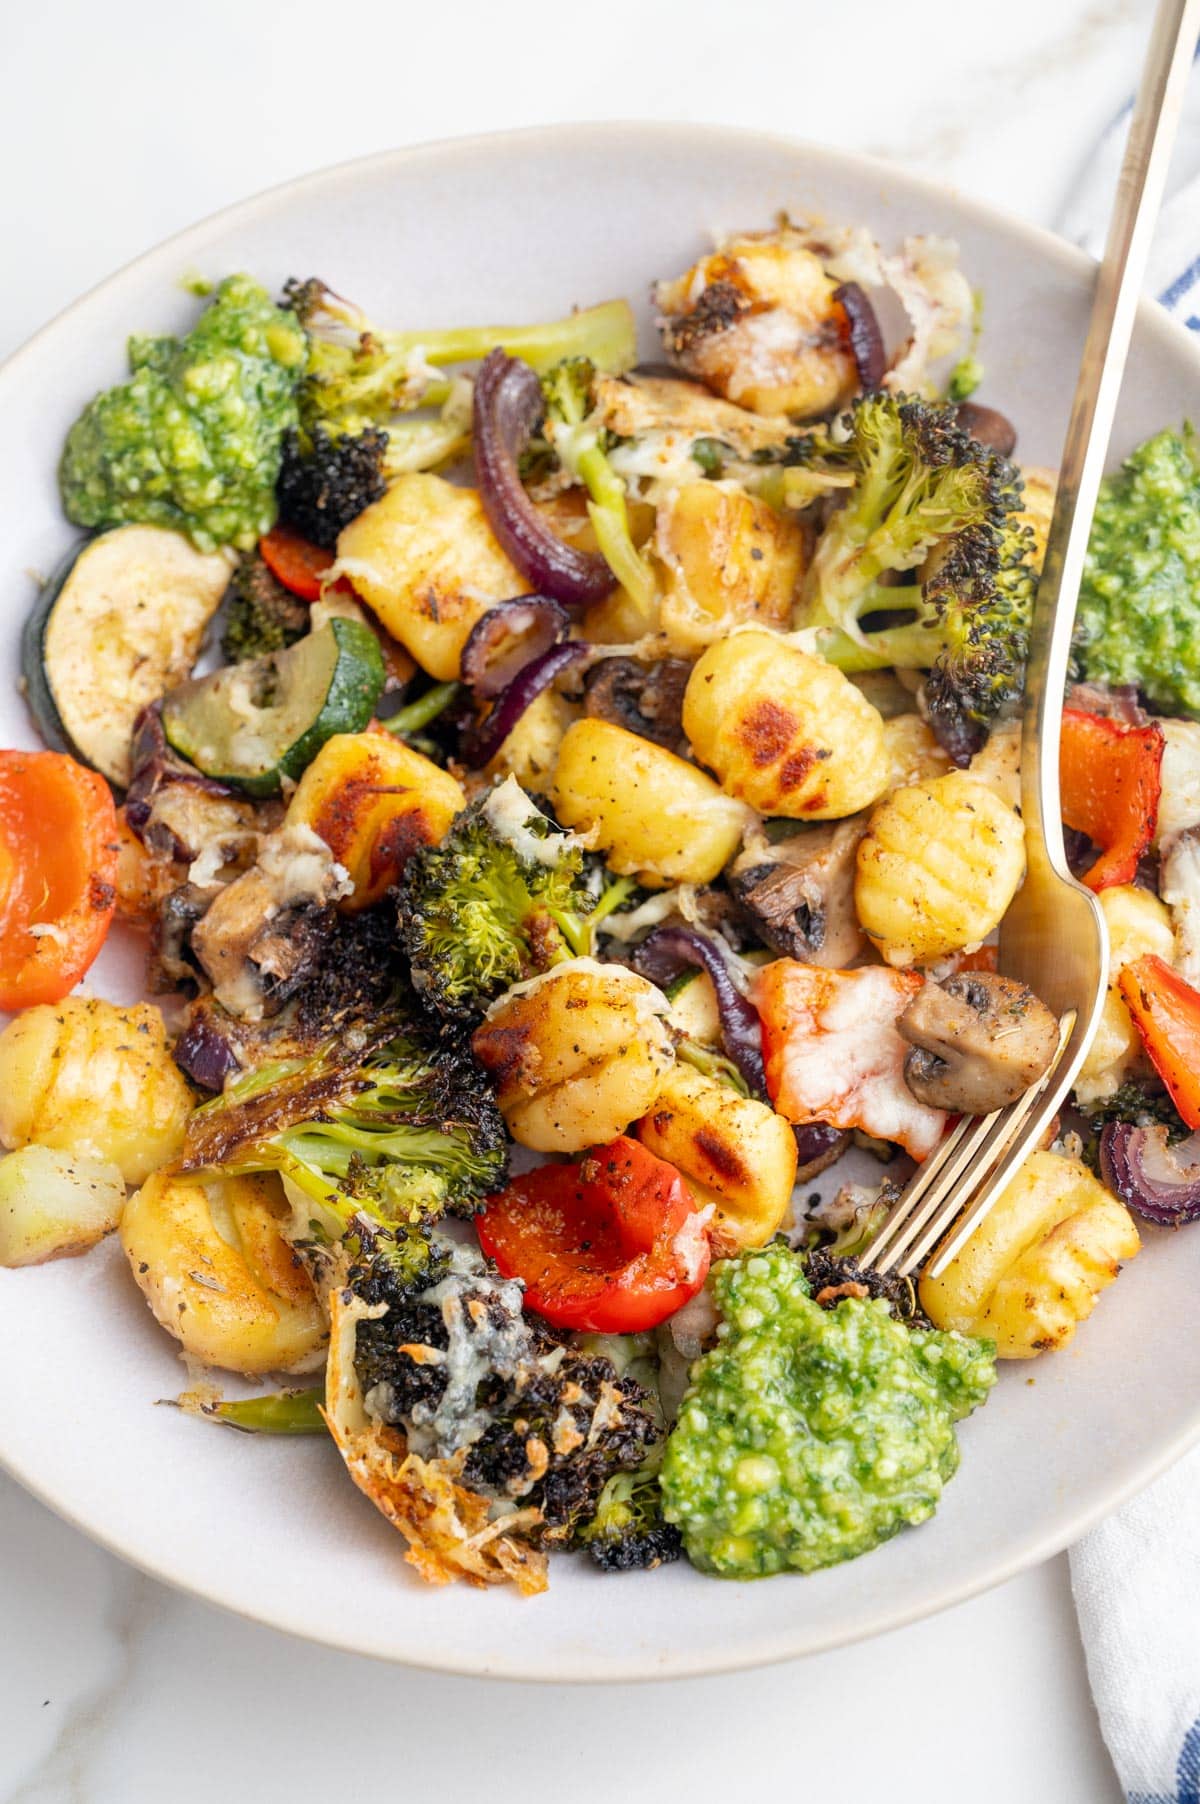 Sheet pan gnocchi and vegetables with basil pesto on a beige plate.